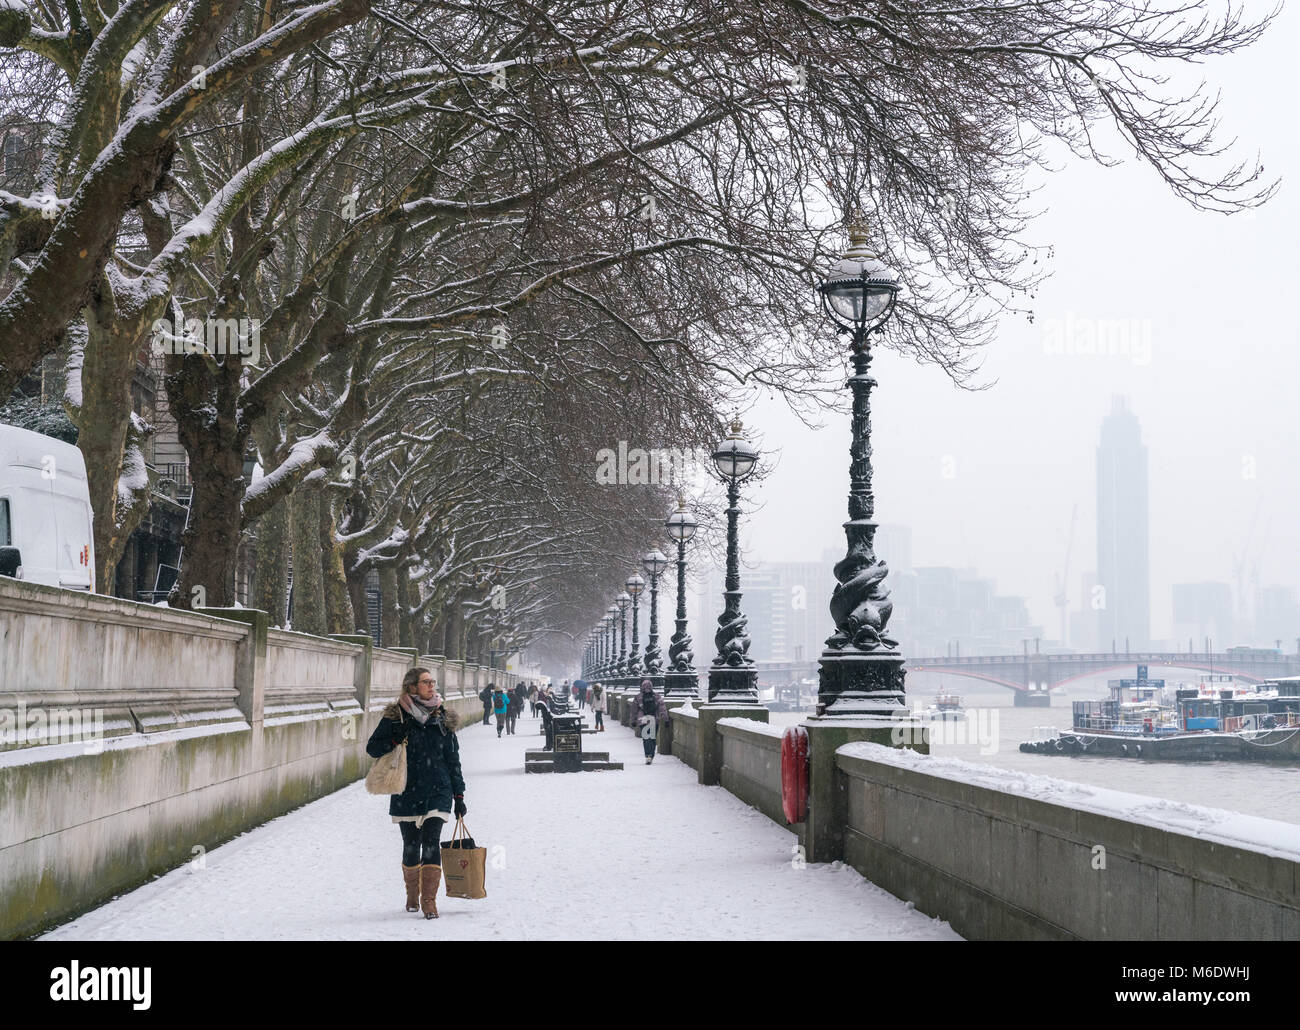 2nd March 2018 - England, London.  Women walking on snow. Snowfall in the capital covered roads and buildings on the second day of spring. Stock Photo